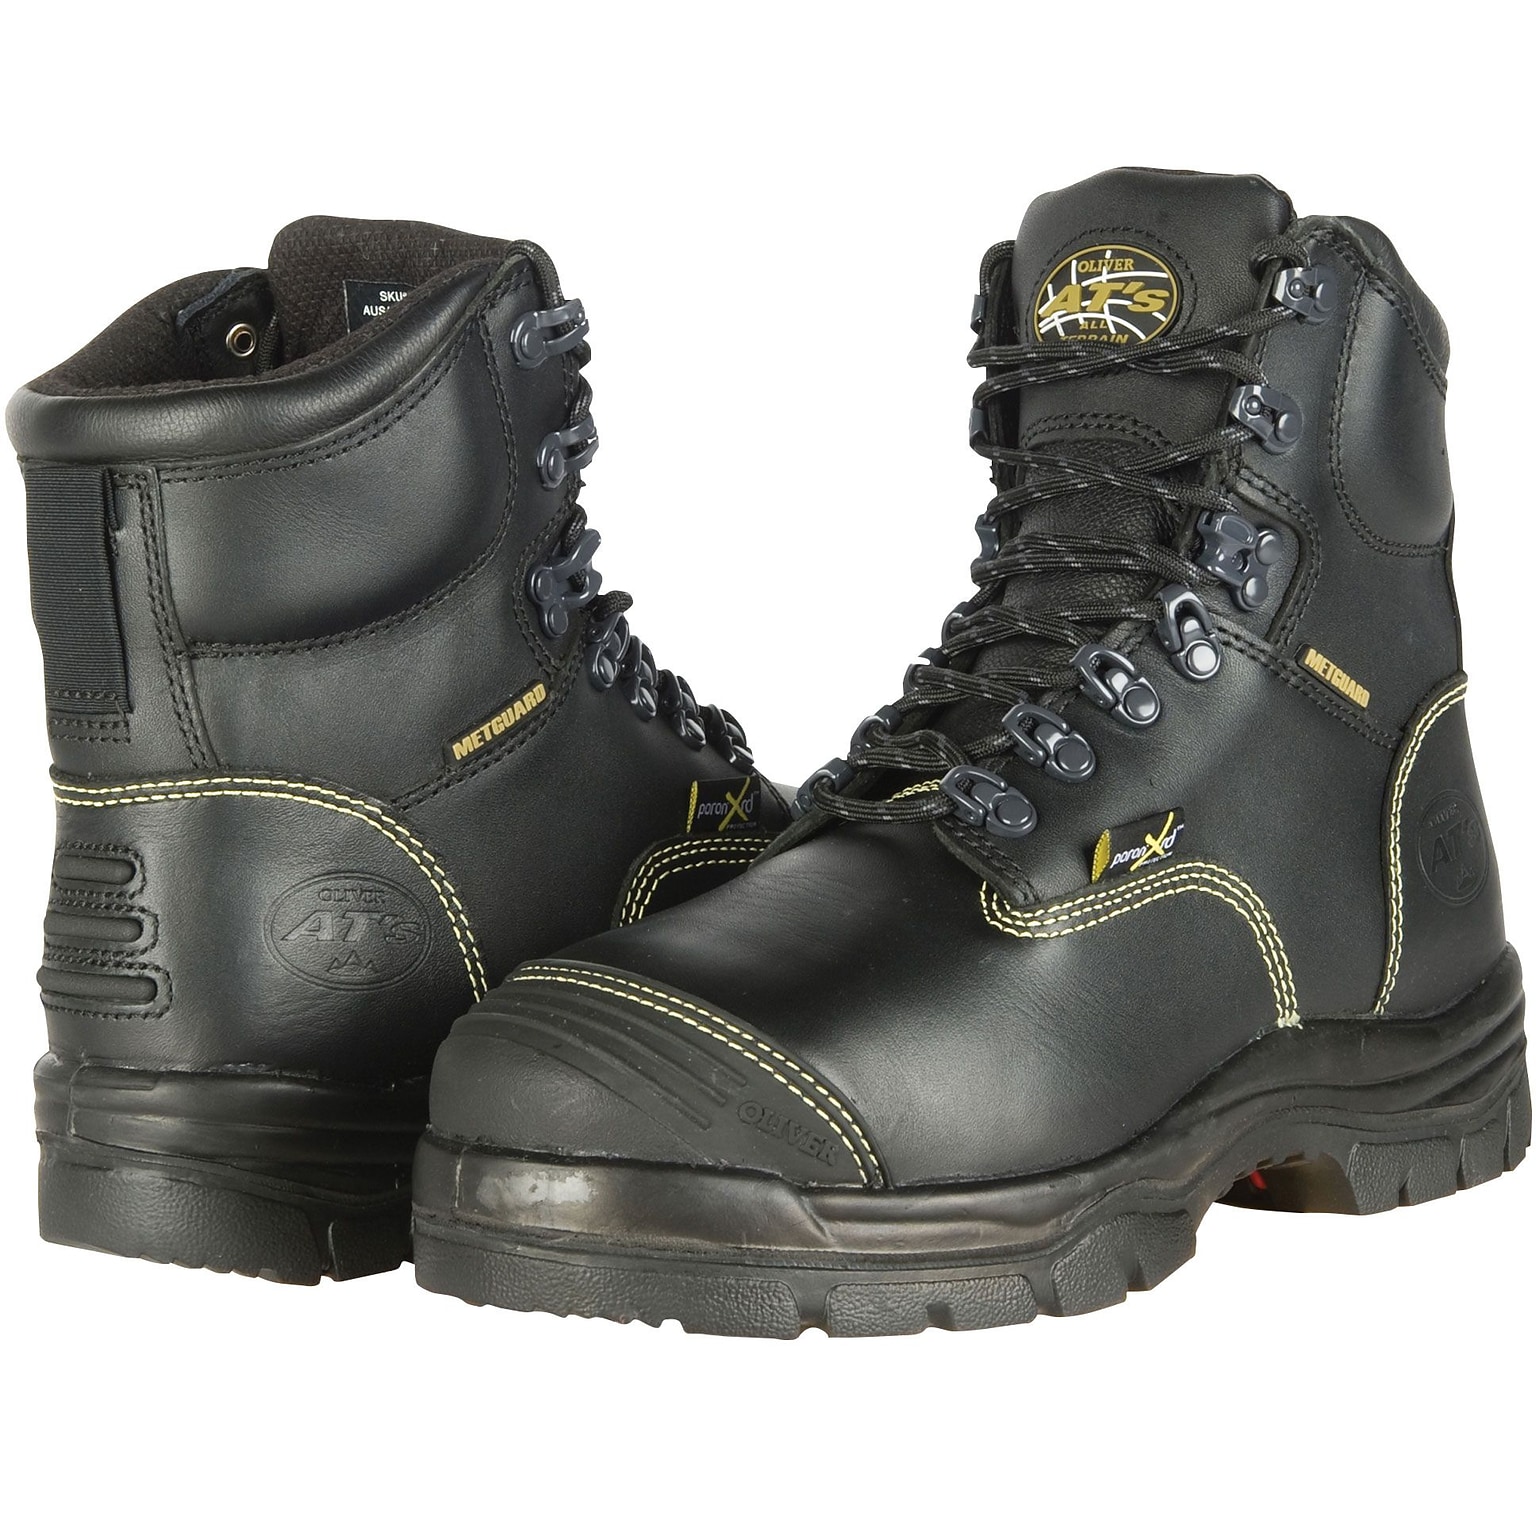 Oliver by Honeywell Metatarsal Guard Mining Work Boots, Black, Size 5(821-55246BLK080)